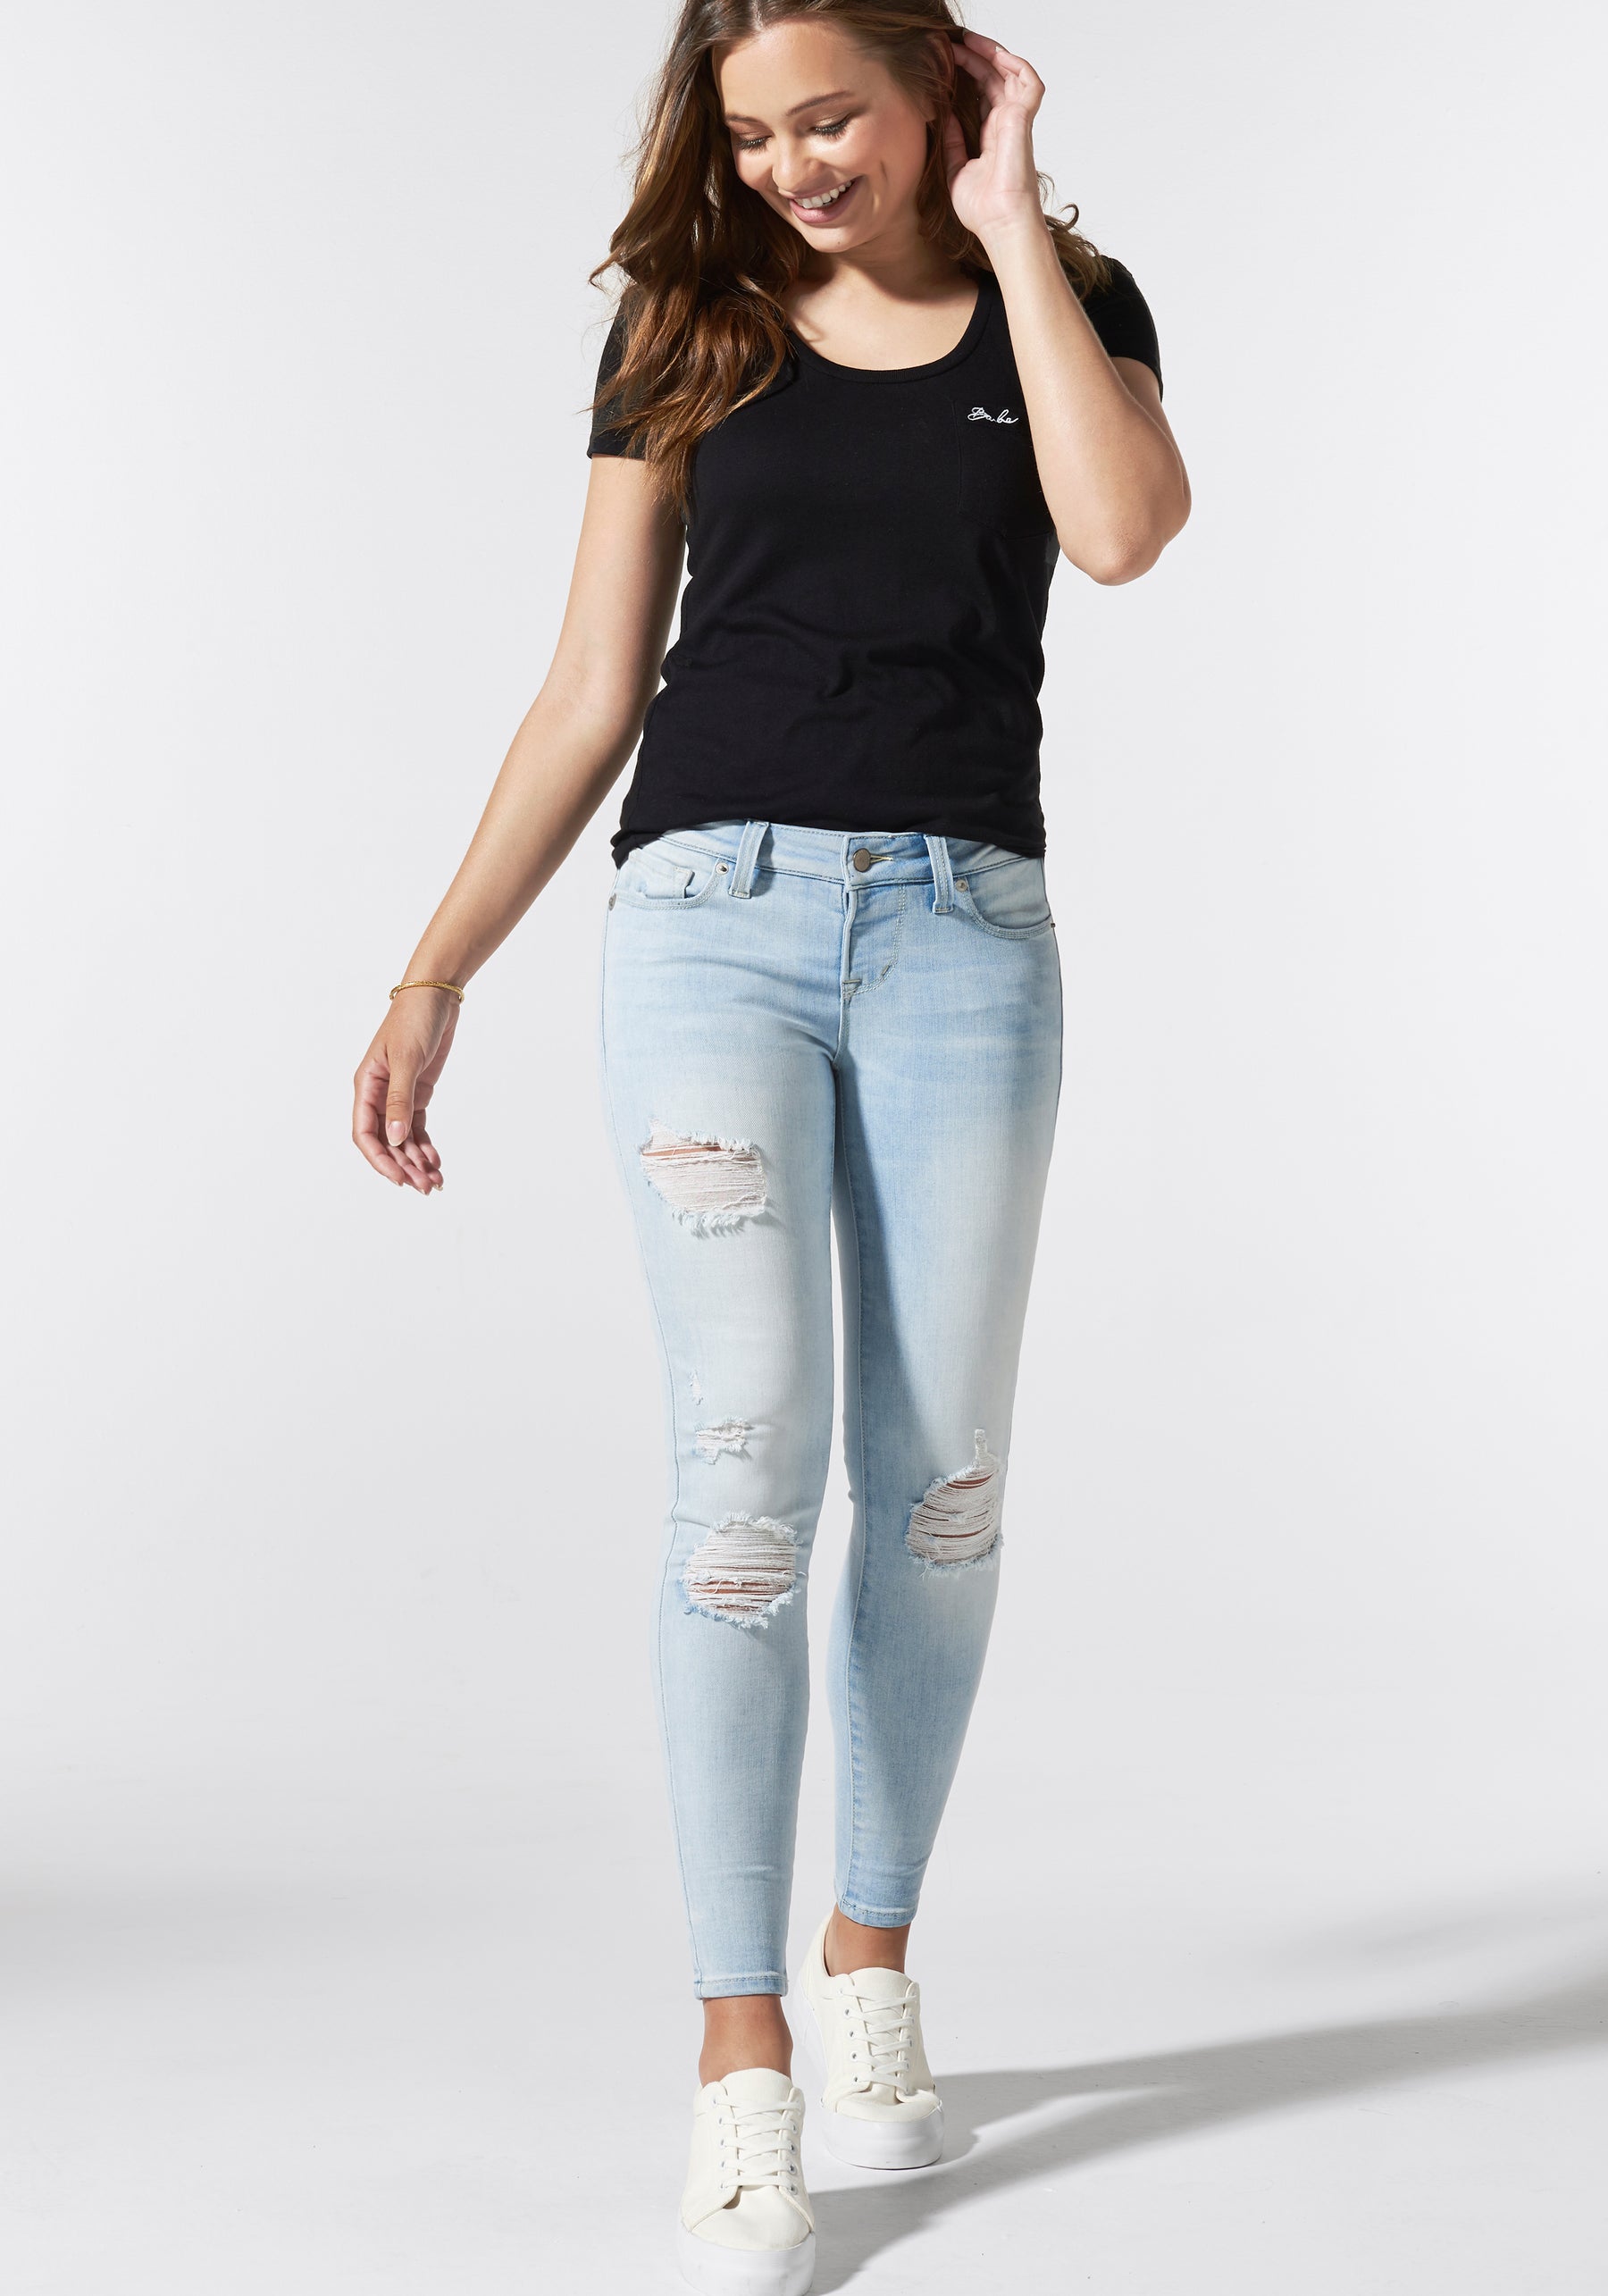 Hollister Jeggings Blue Size 4 - $35 - From C